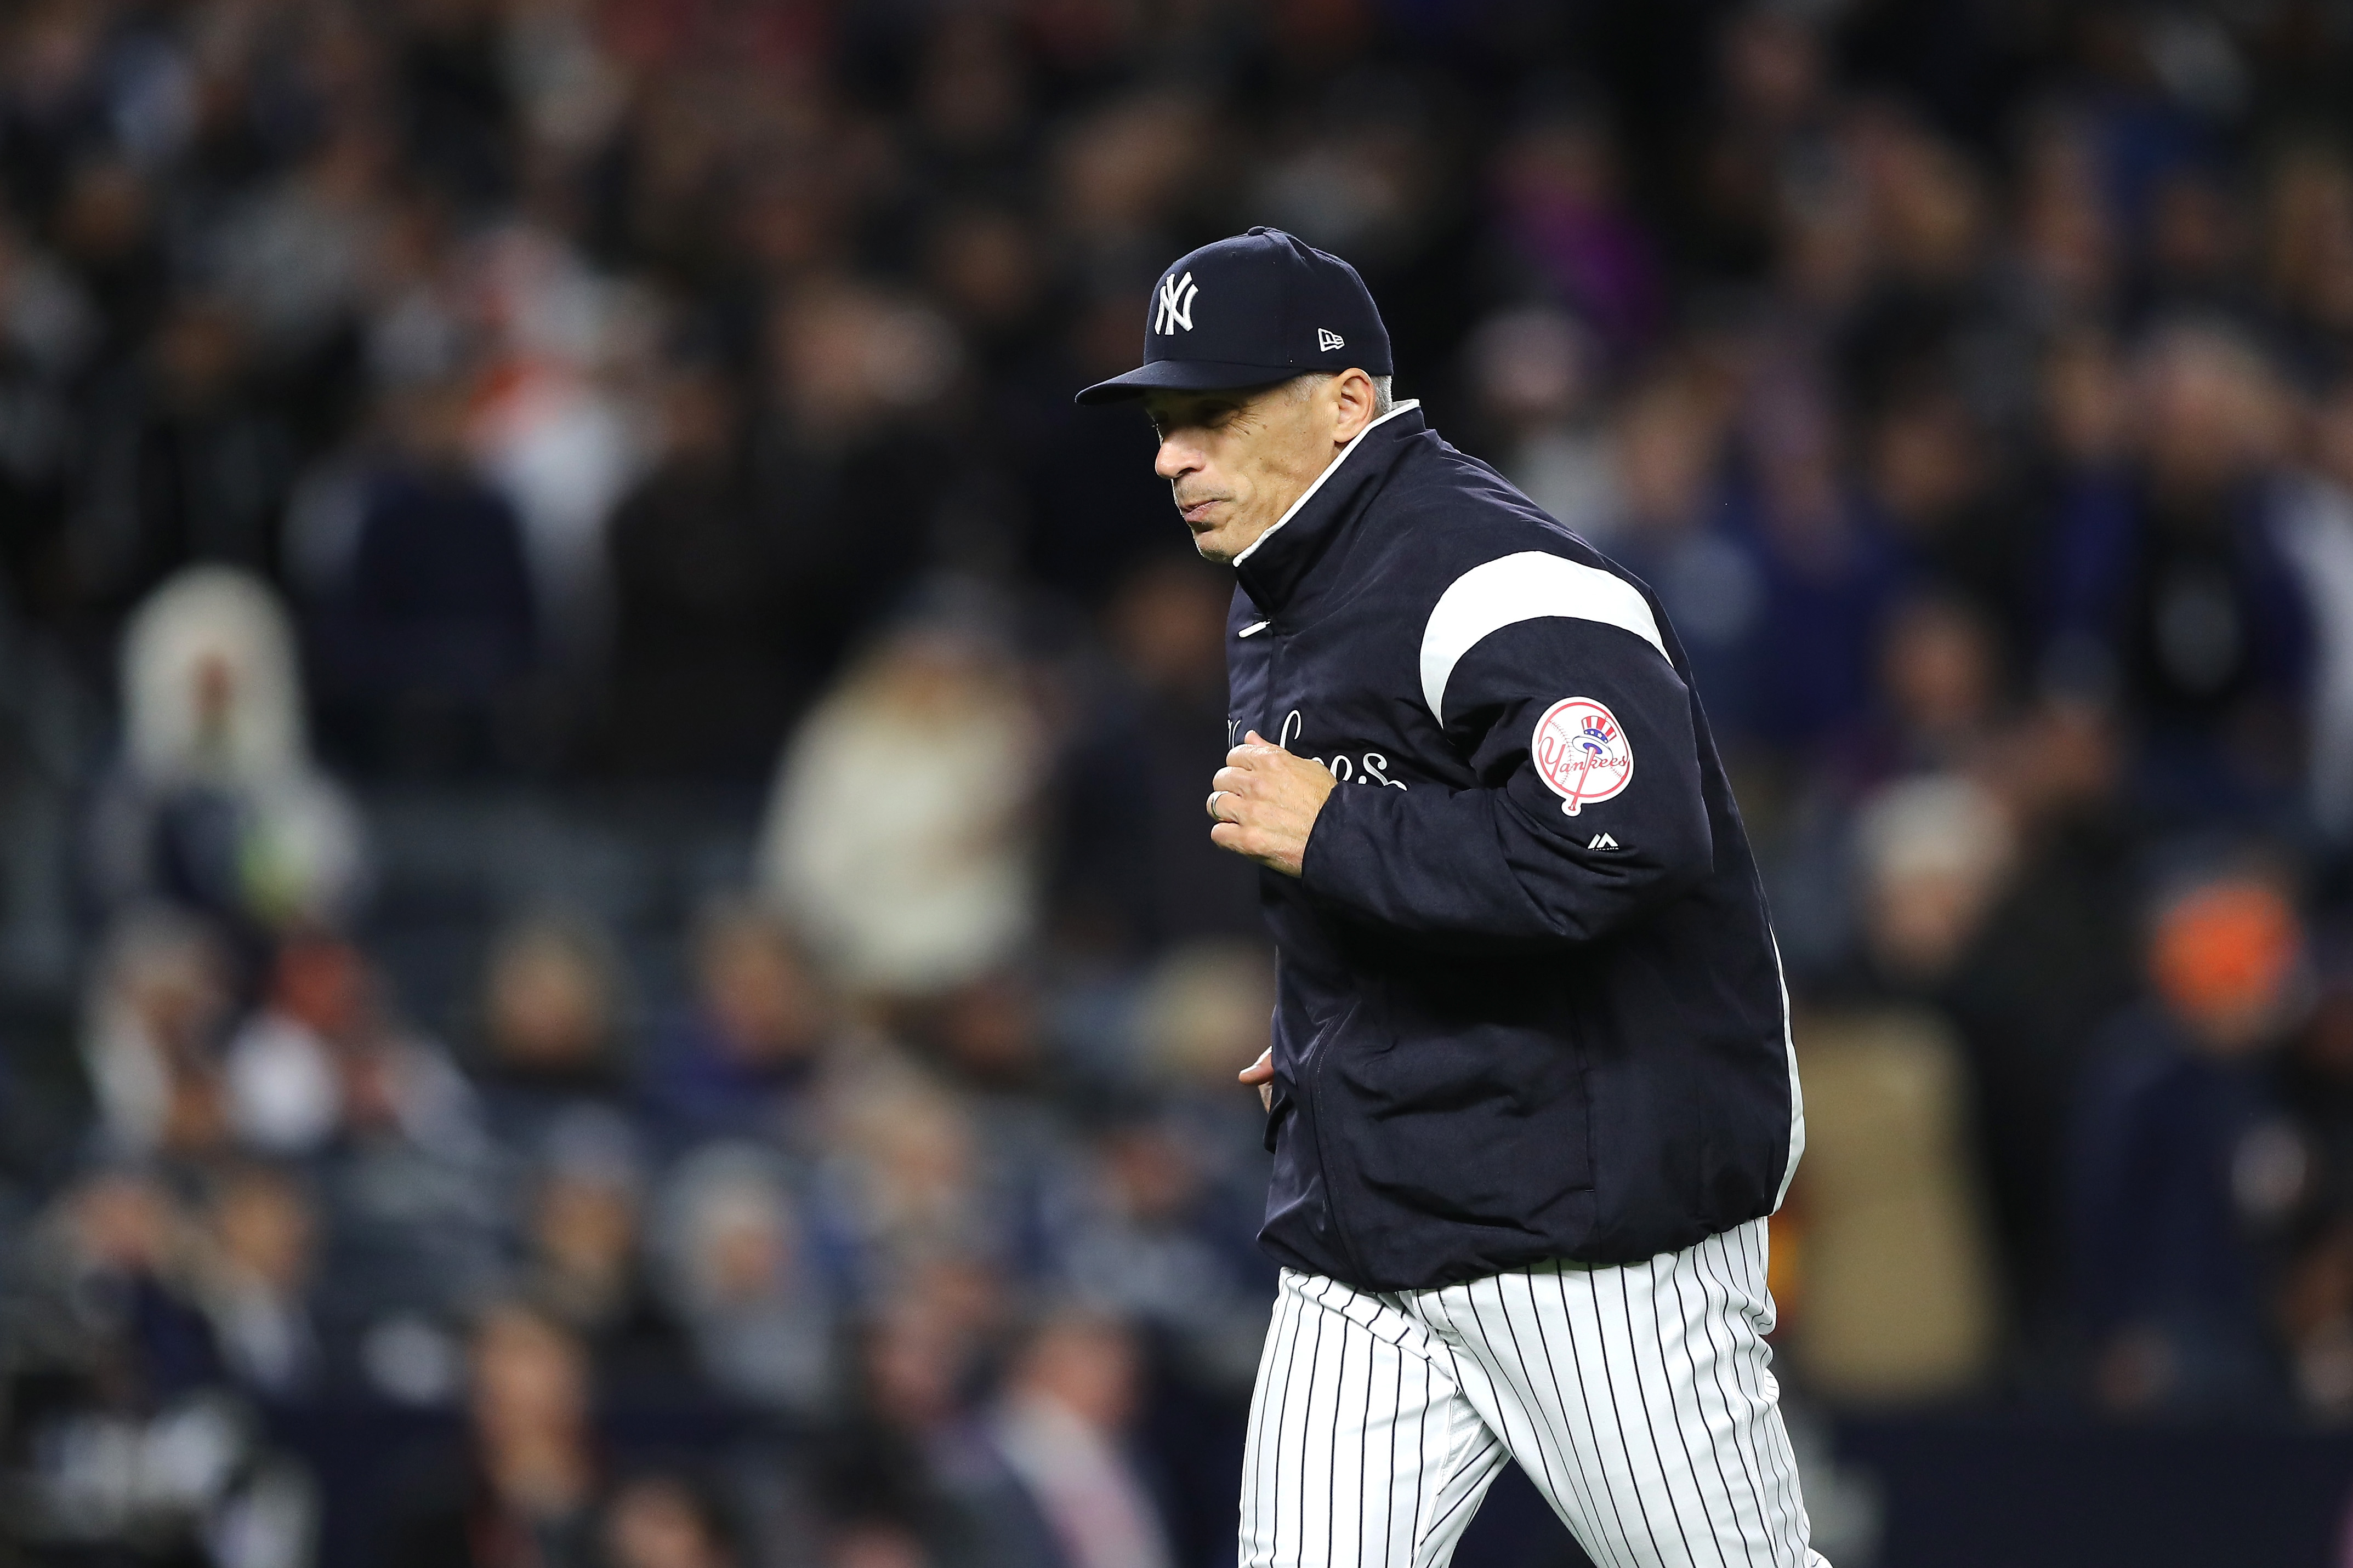 Joe Girardi out as Yankees manager after 10 years - Sports Illustrated